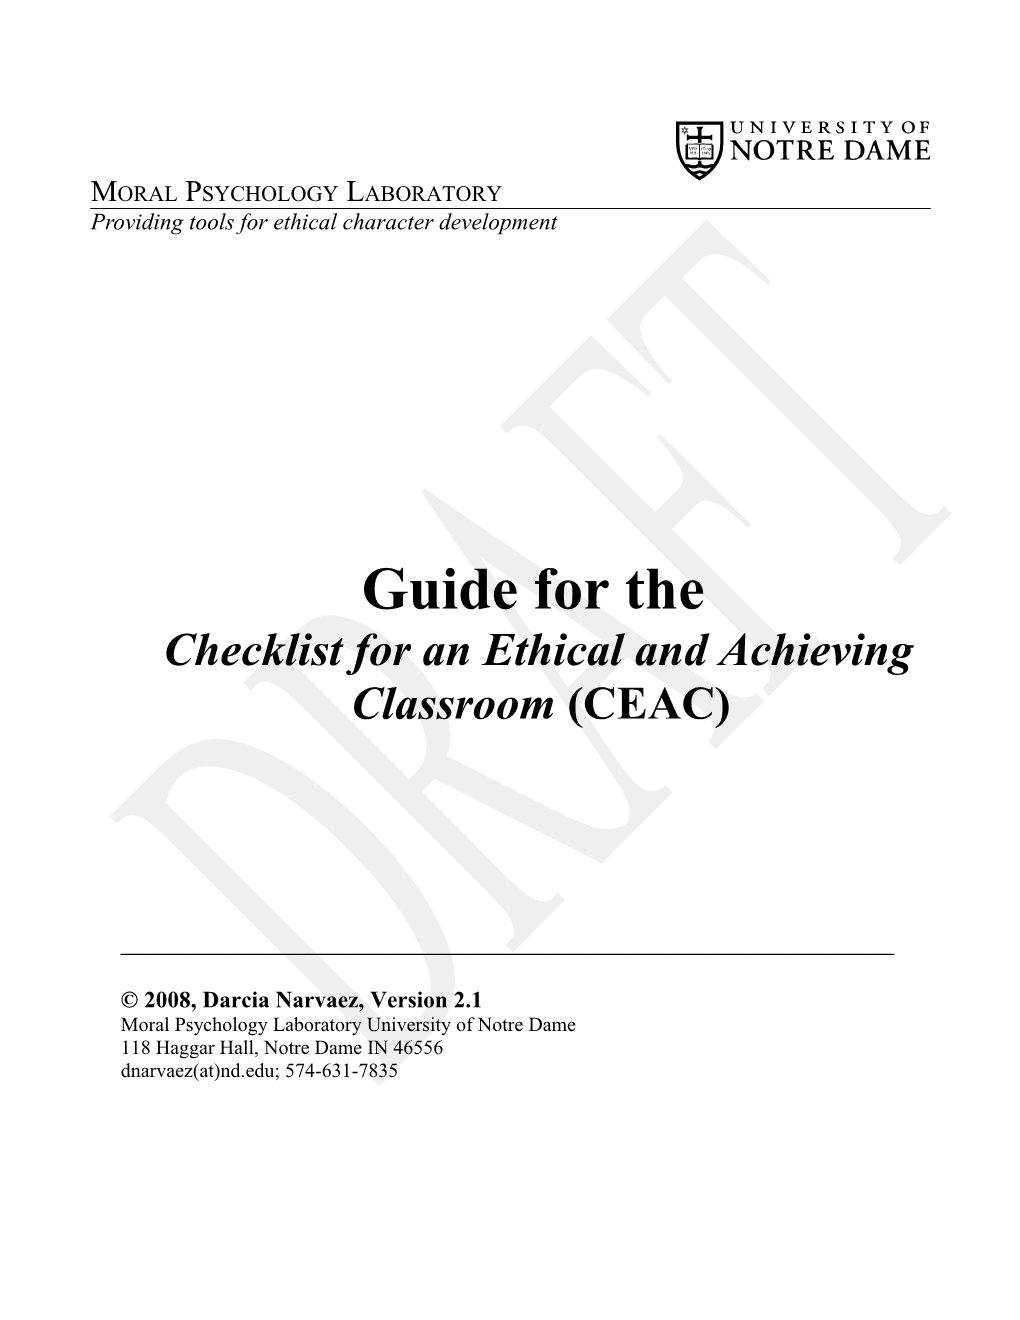 Checklist for an Ethical and Achieving Classroom (CEAC)